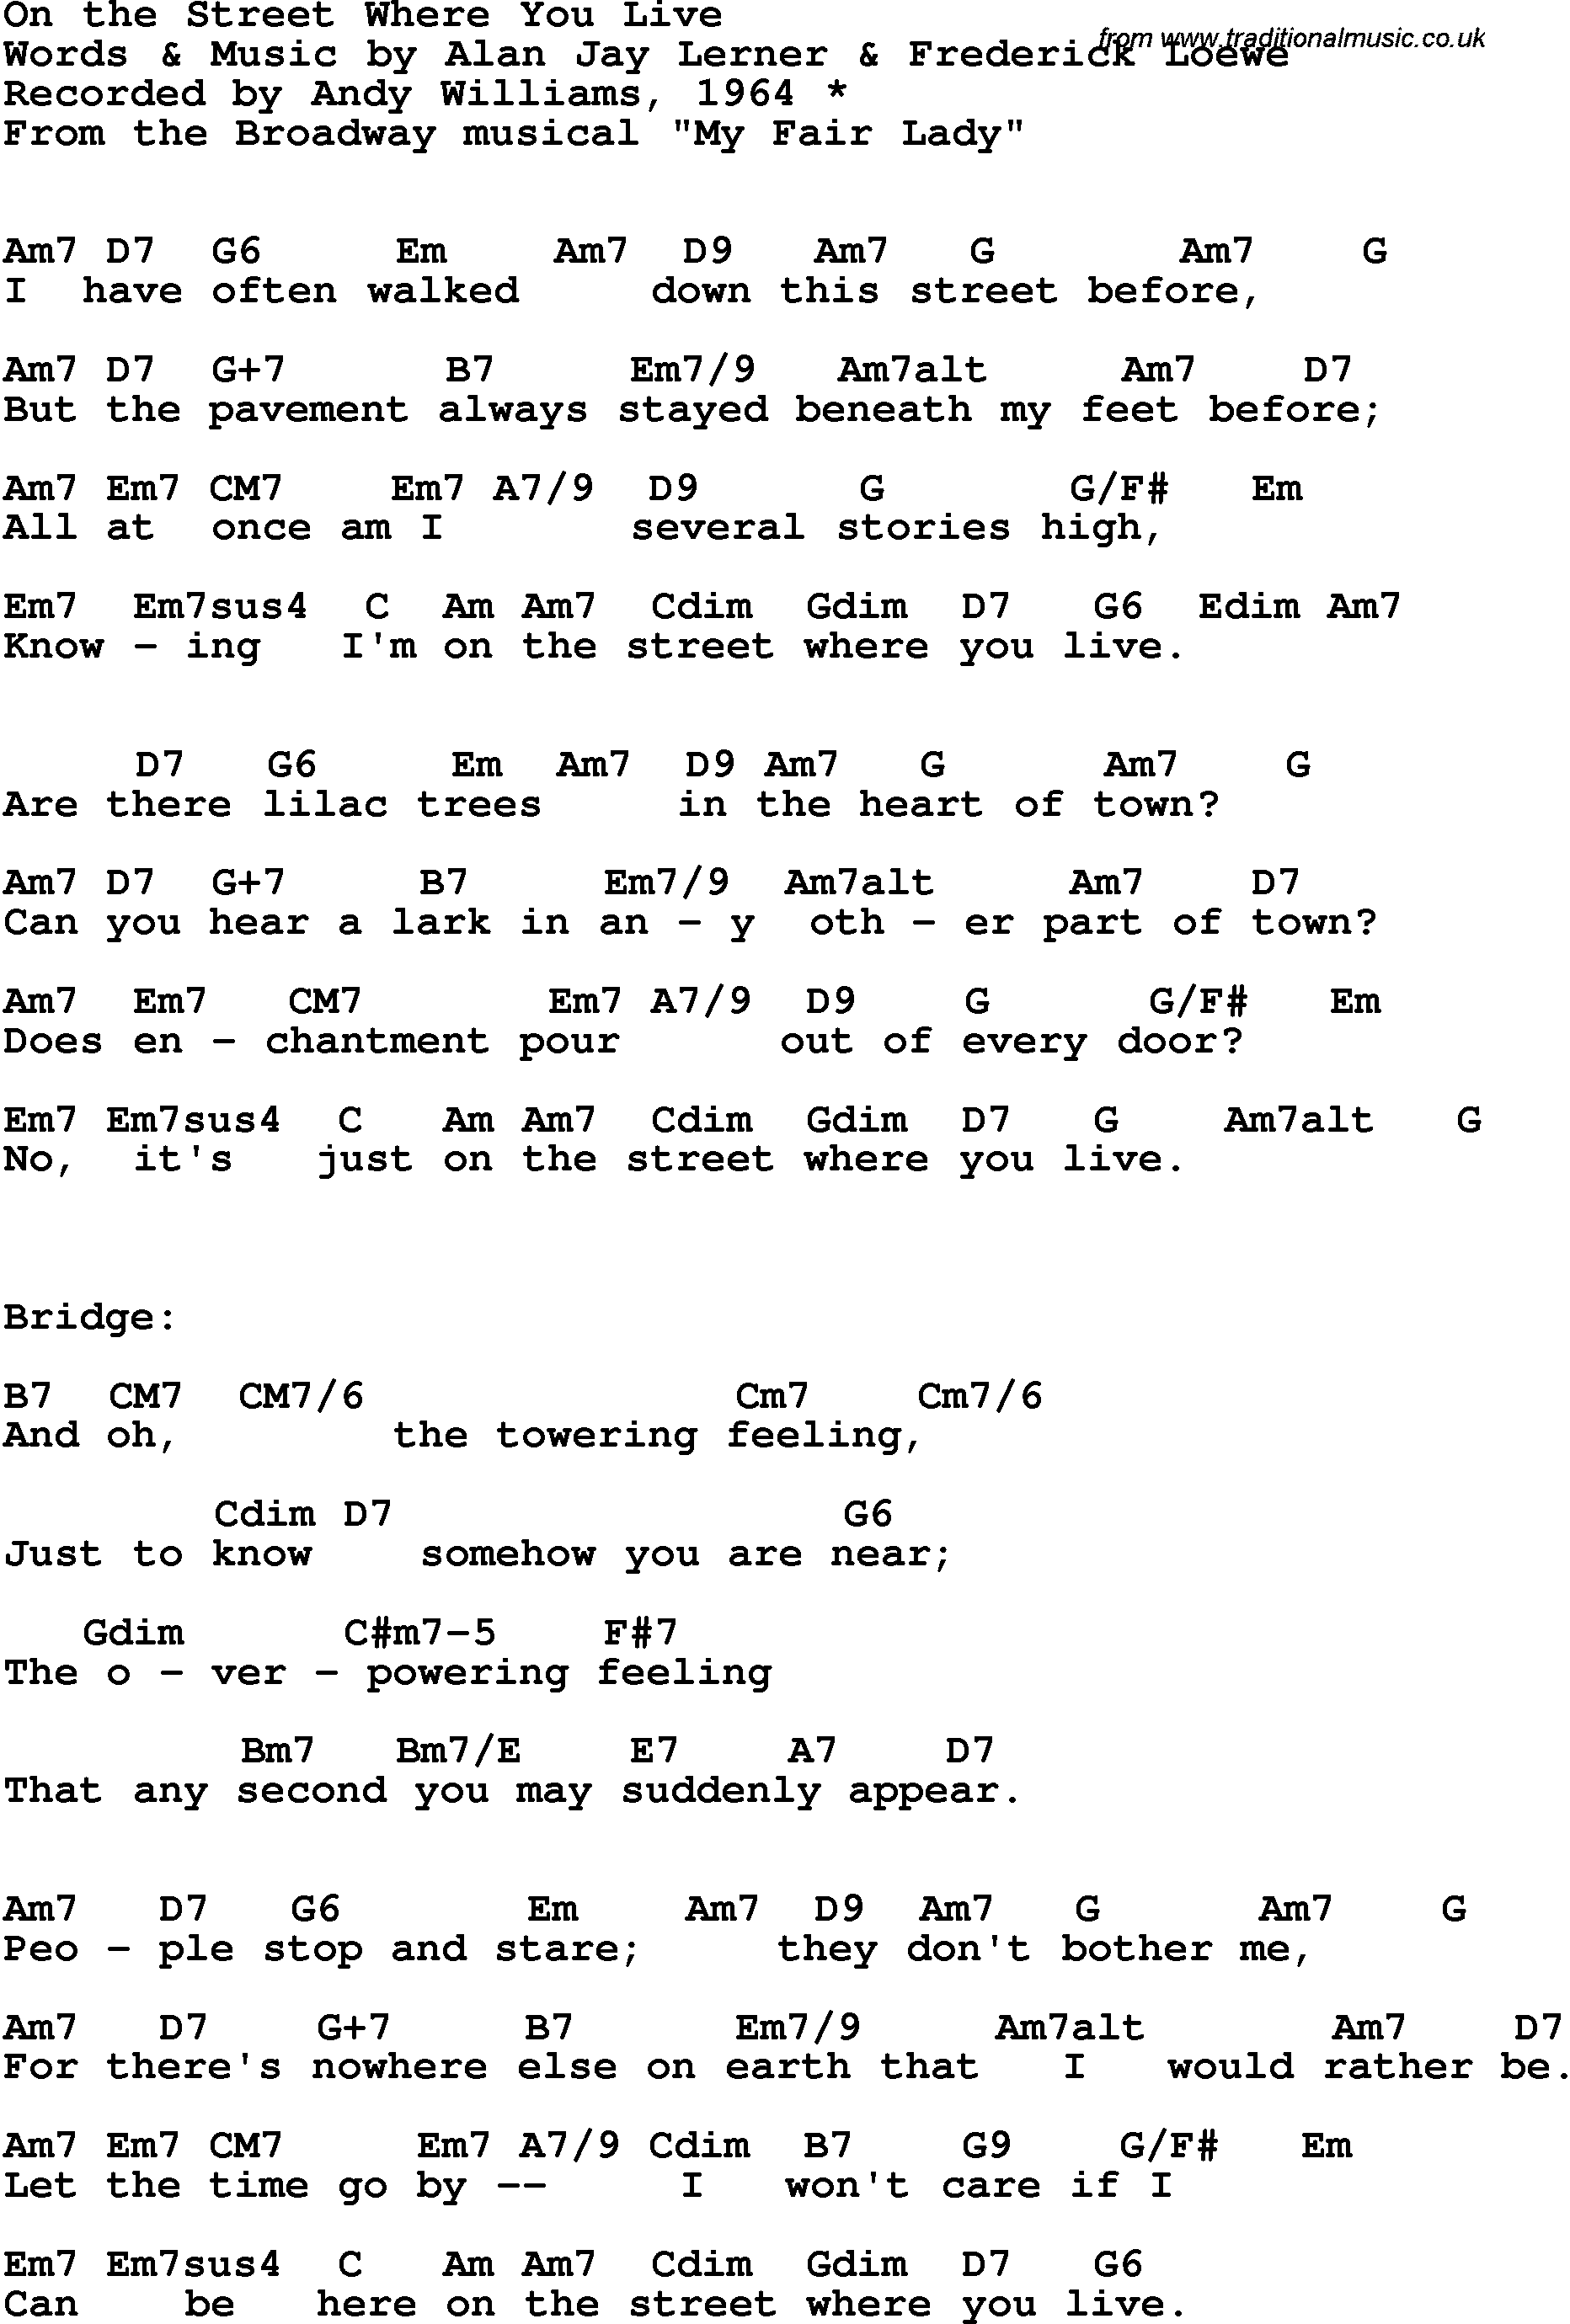 Song Lyrics with guitar chords for On The Street Where You Live - Andy Williams, 1964